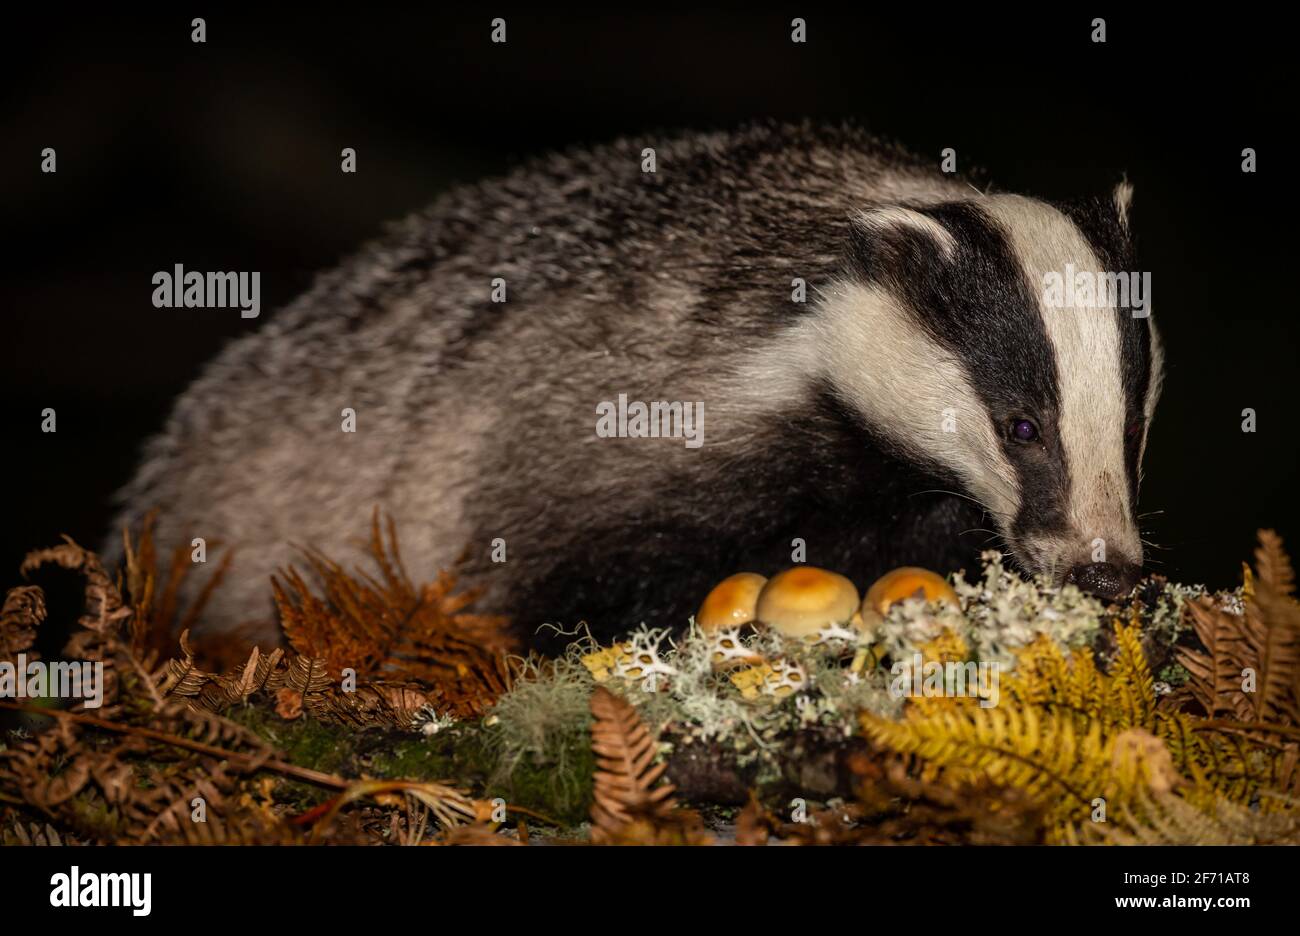 Badger, Scientific name: Meles Meles. Wild, native, European  badger  foraging in Autumn, with toadstools and golden ferns. Night time image.  Facing Stock Photo